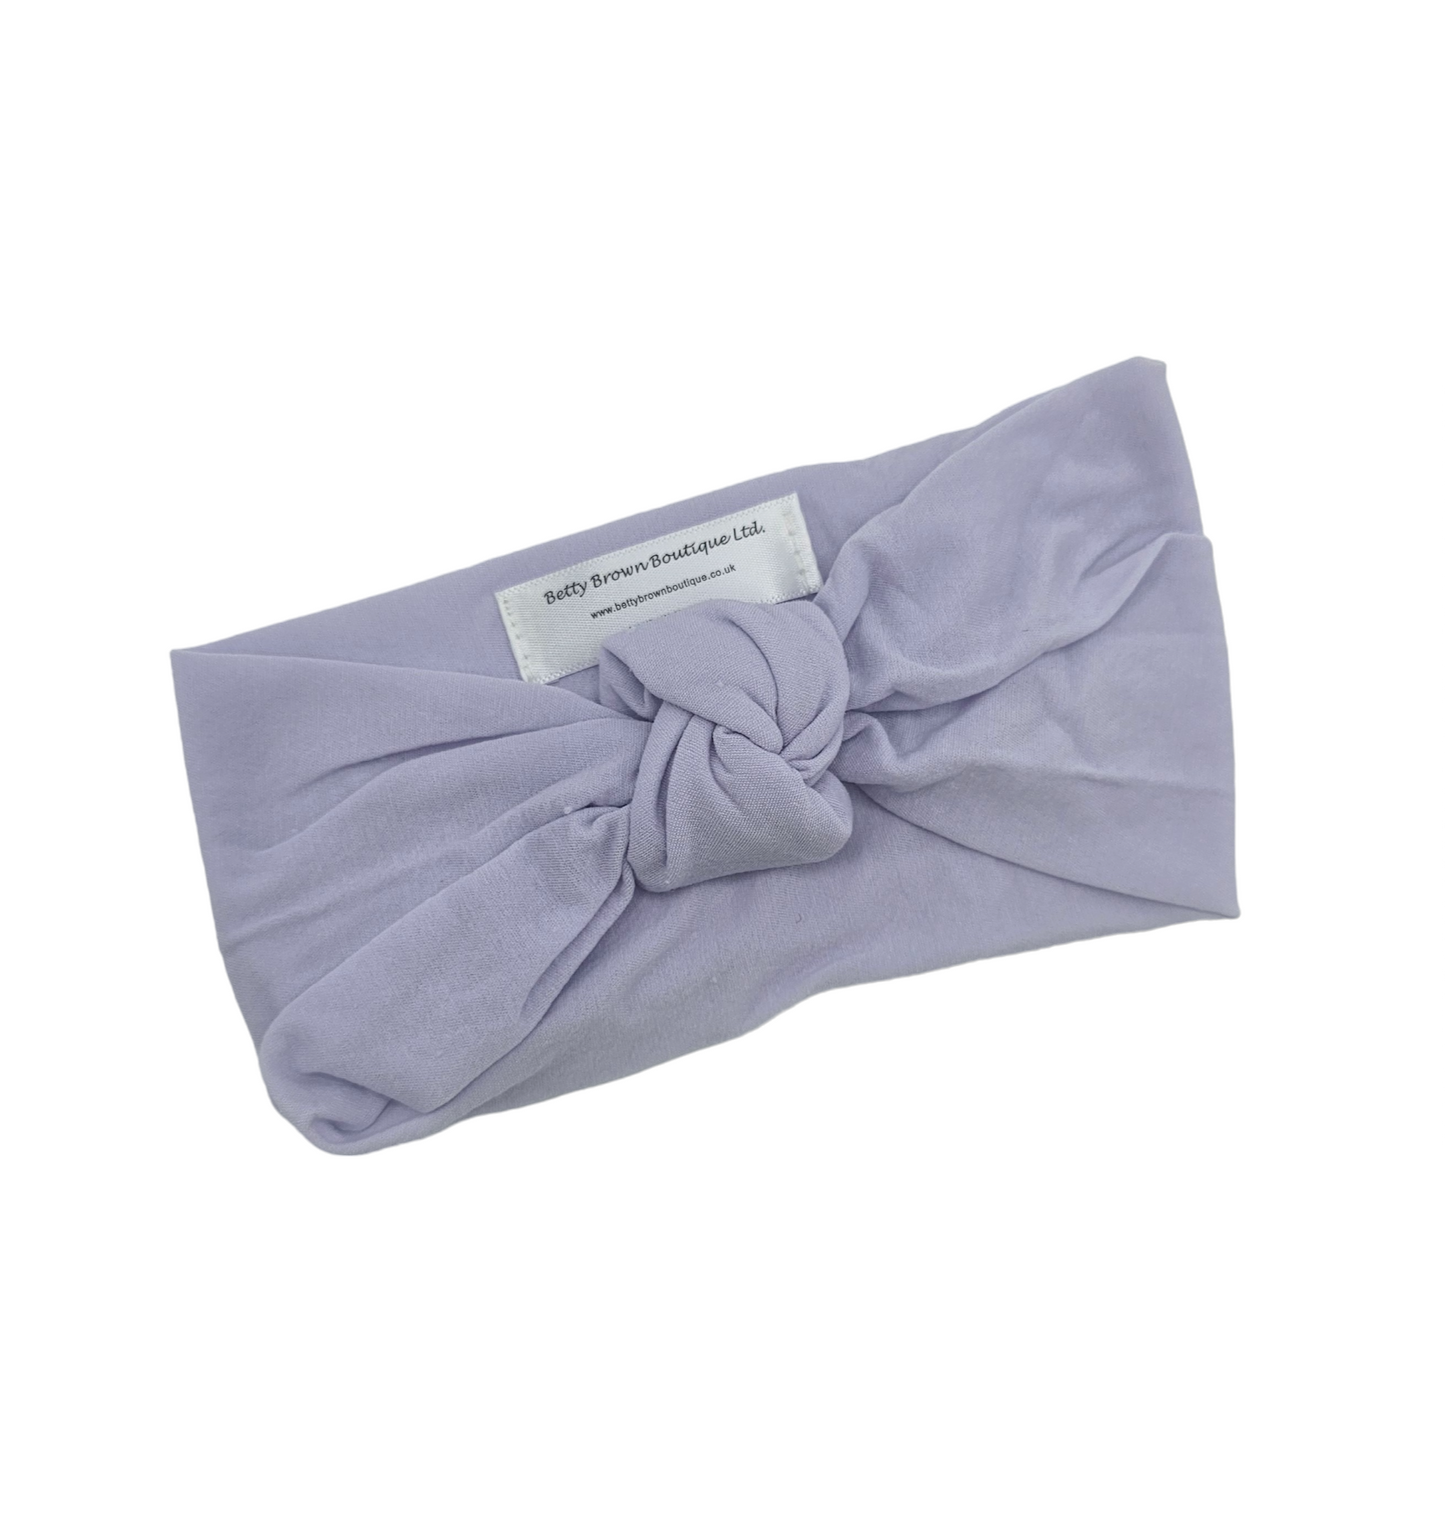 Pale Lilac Smooth Knot Headwrap - Betty Brown Boutique Ltd